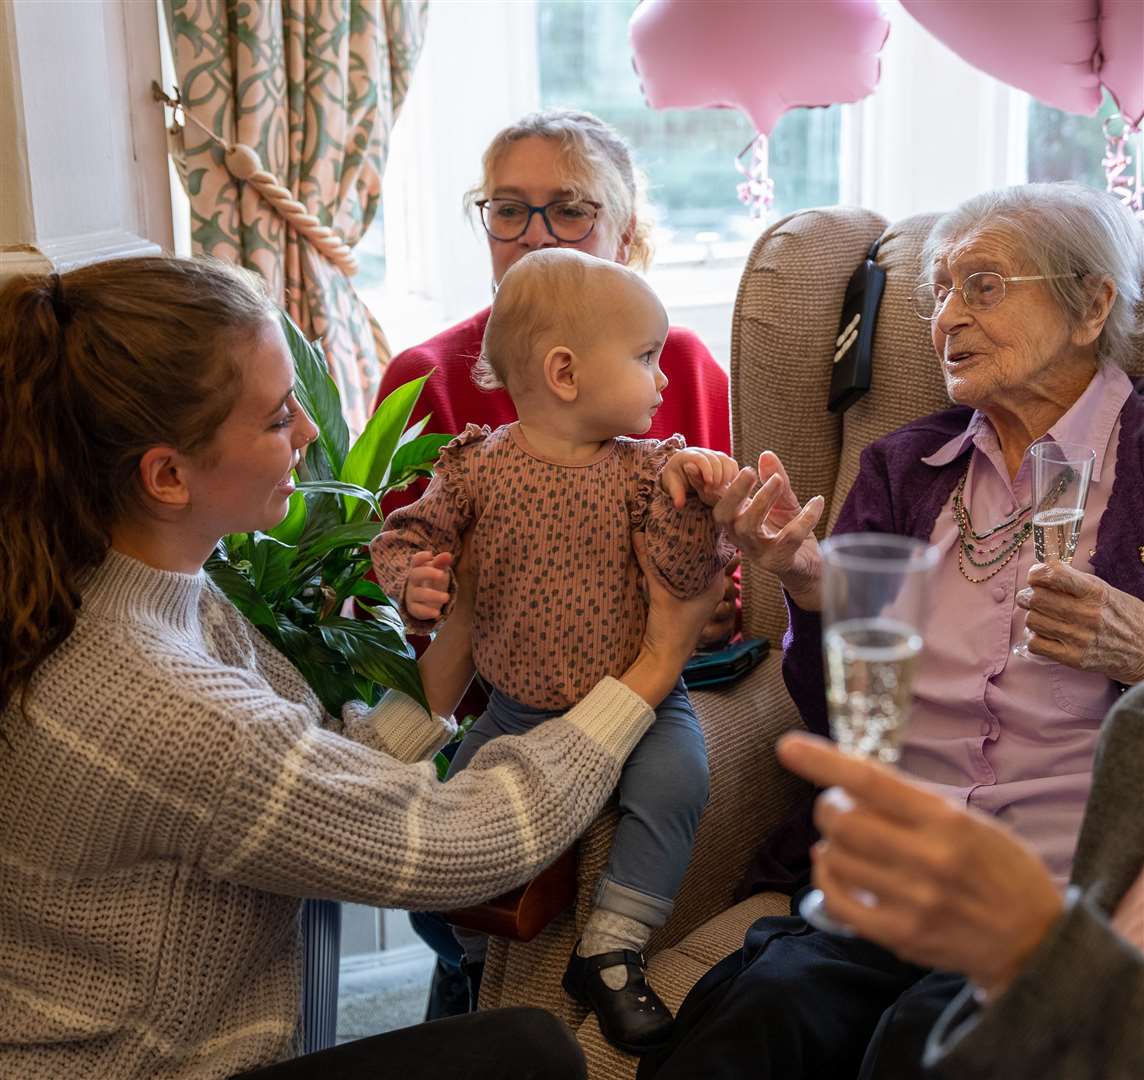 Kathleen Withall celebrating her 103rd birthday with her great-granddaughter Millie and great-great-granddaughter Nova, aged one (CHD Living/PA)